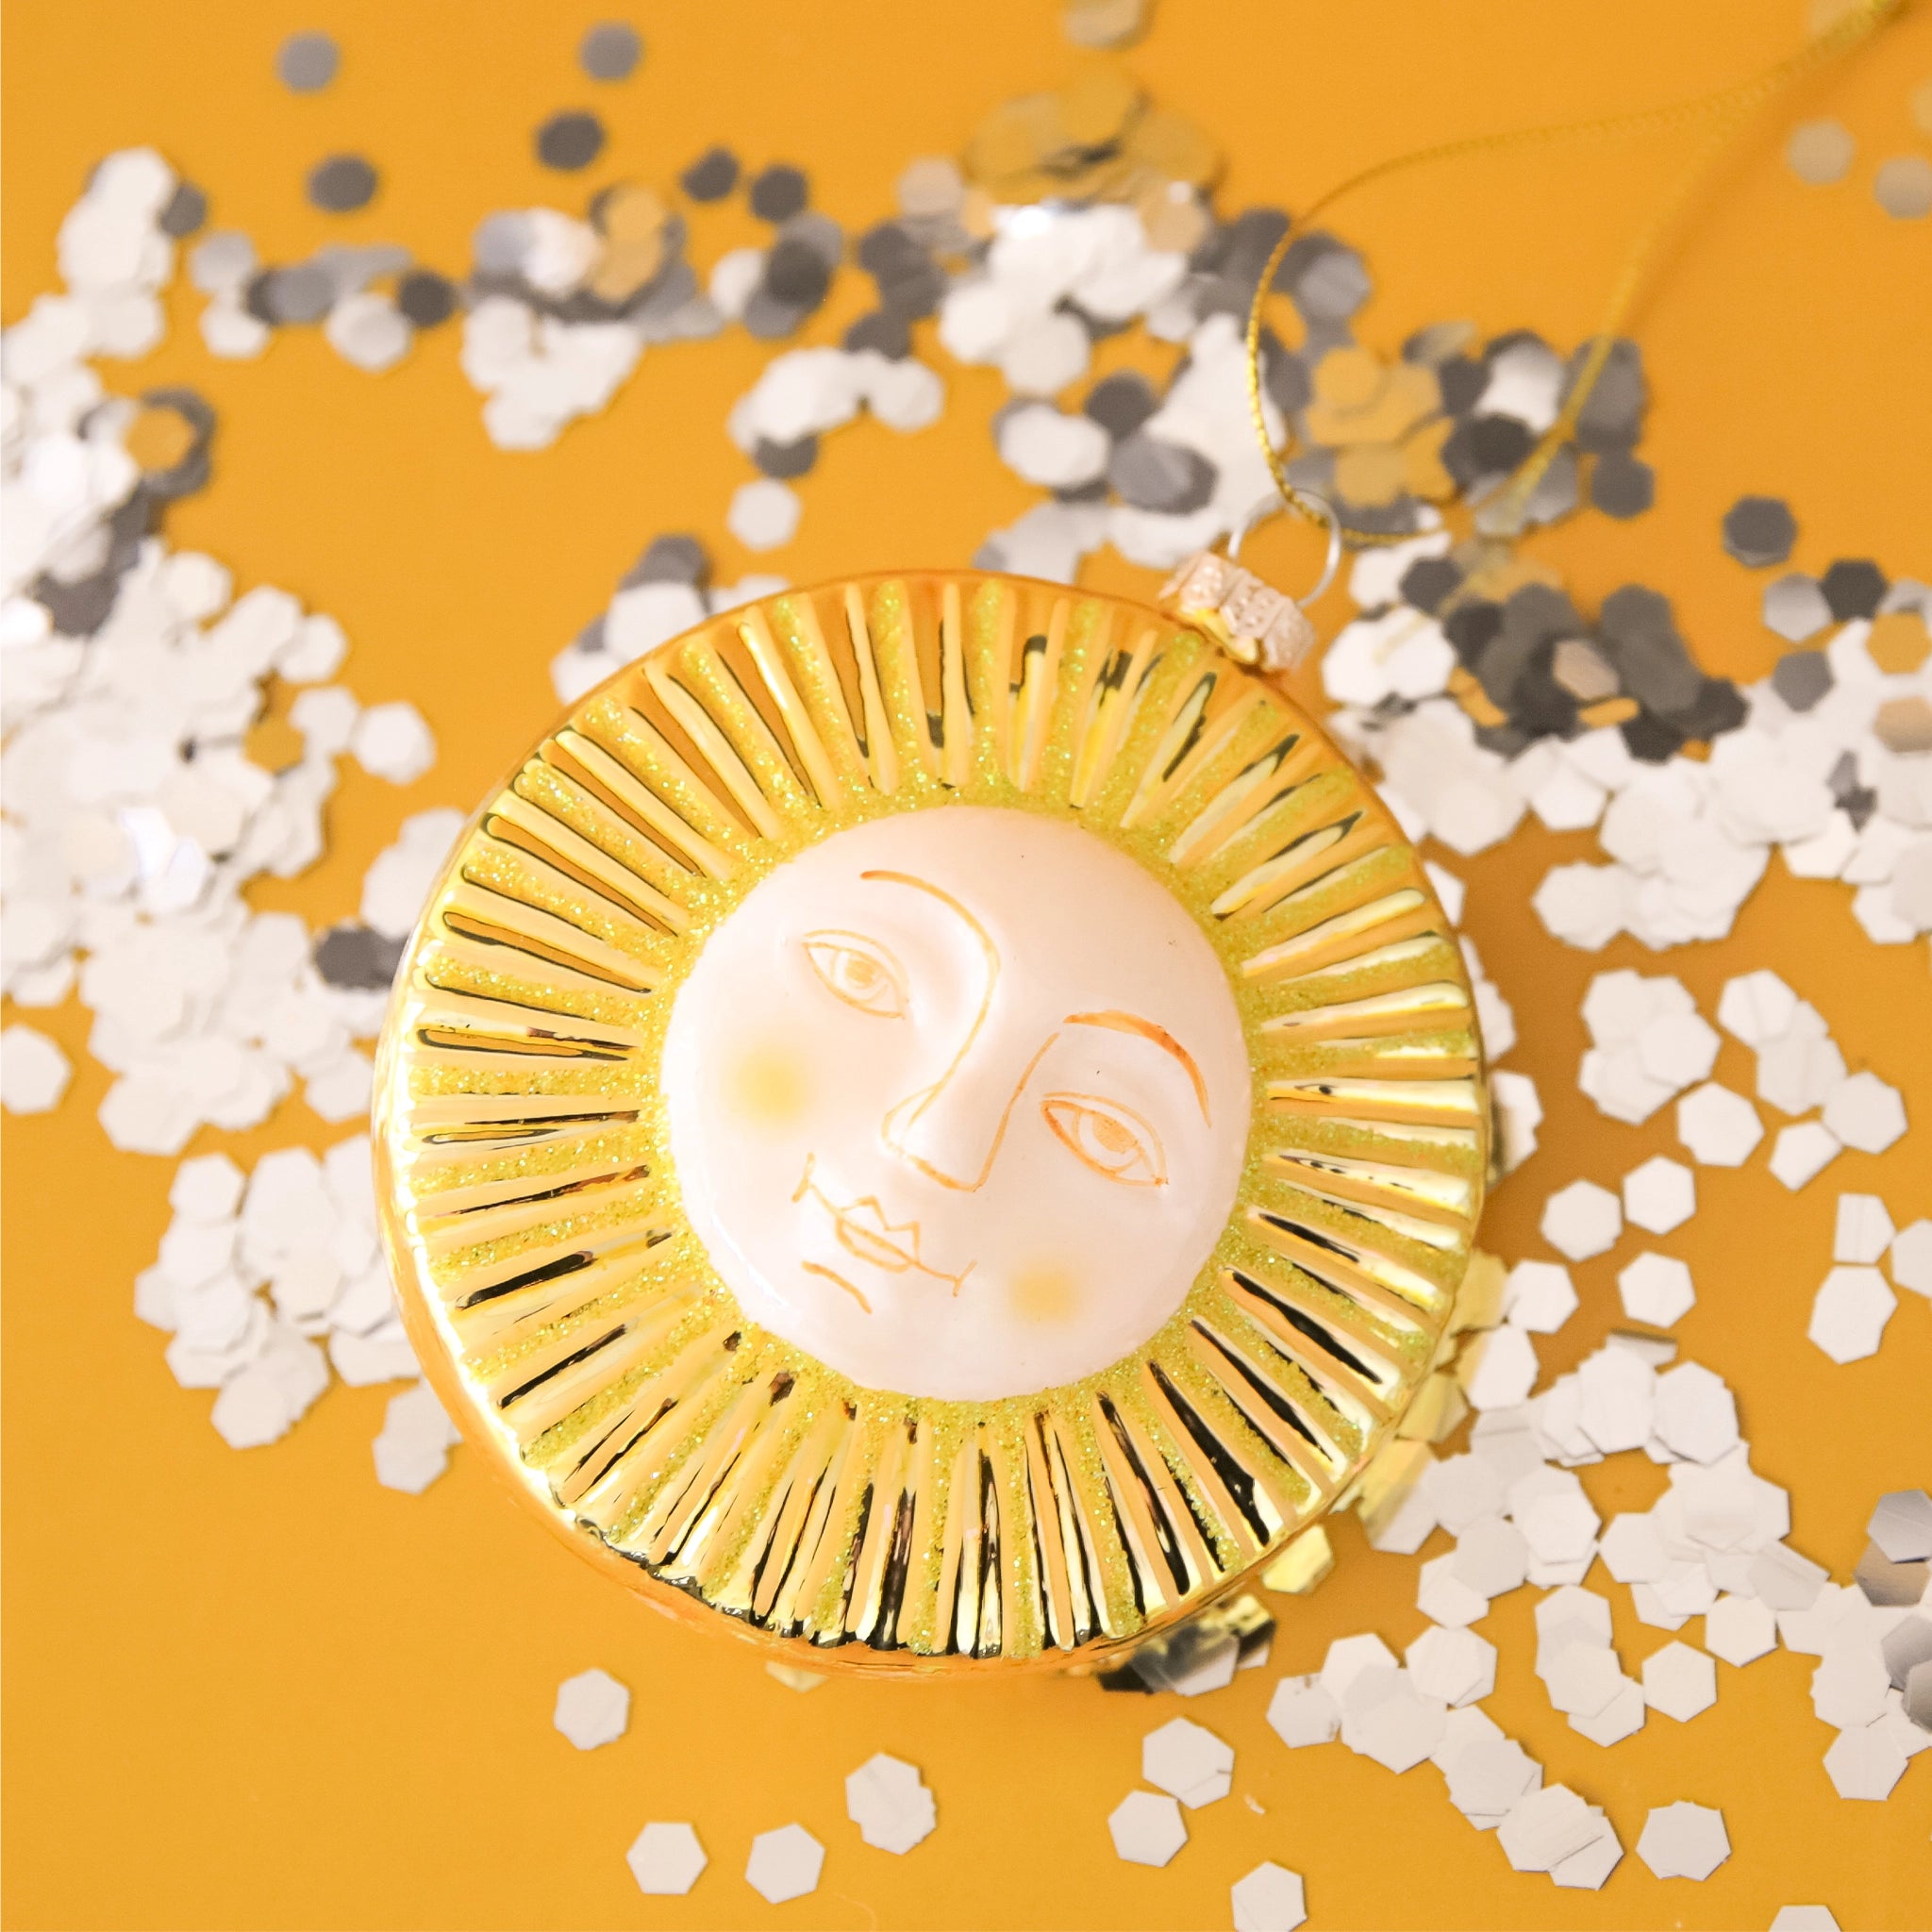 Glass sun ornament features gold rays surrounding a white face.